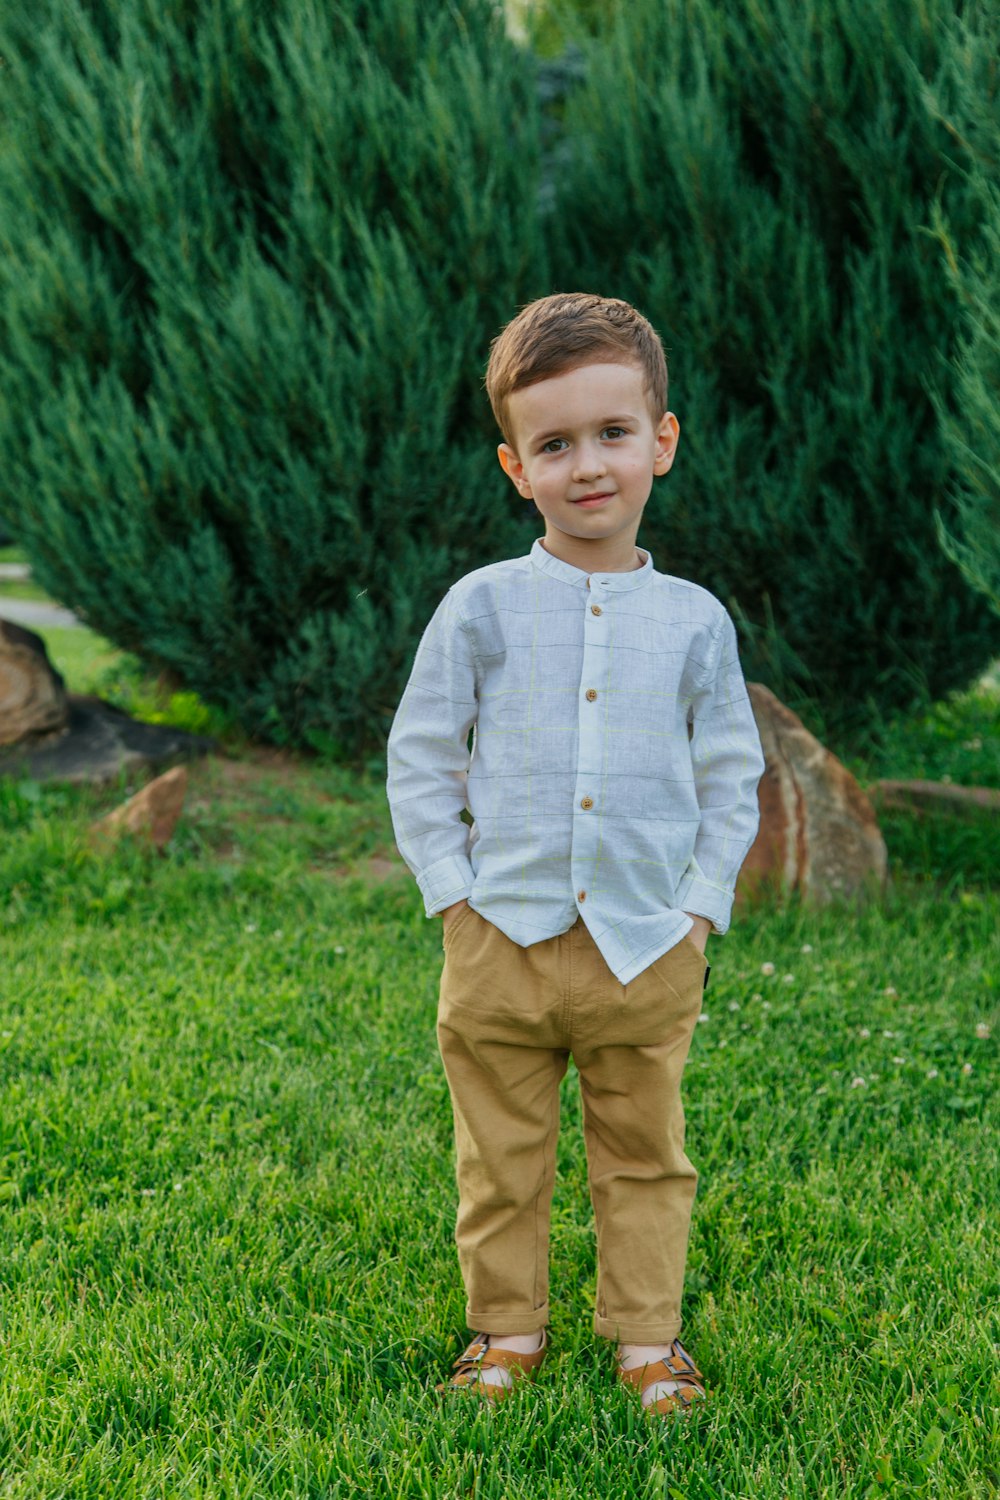 boy in blue dress shirt and brown pants standing on green grass field during daytime